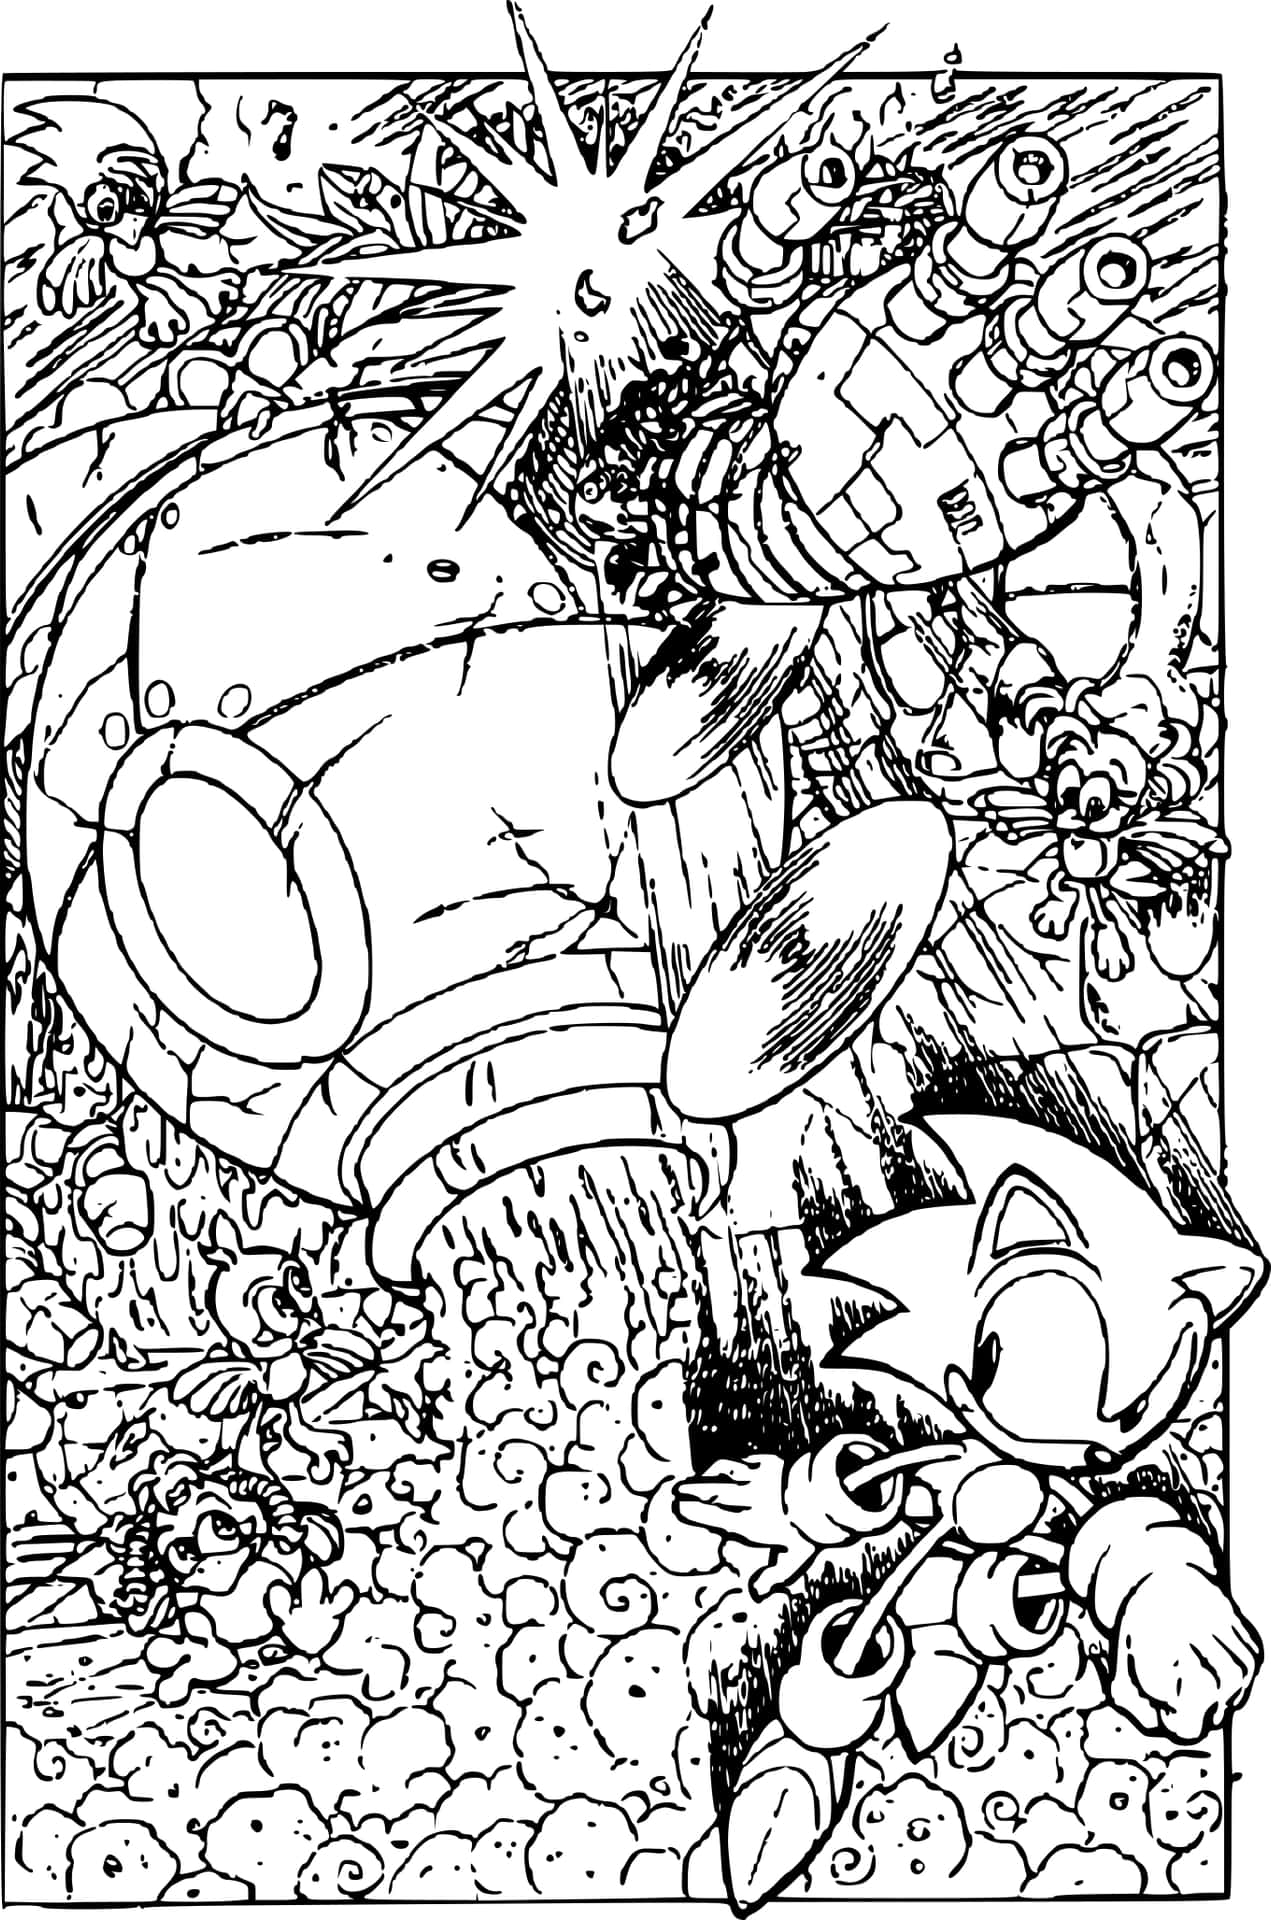 Sonic Coloring Fight Scene With Death Egg Robot Picture